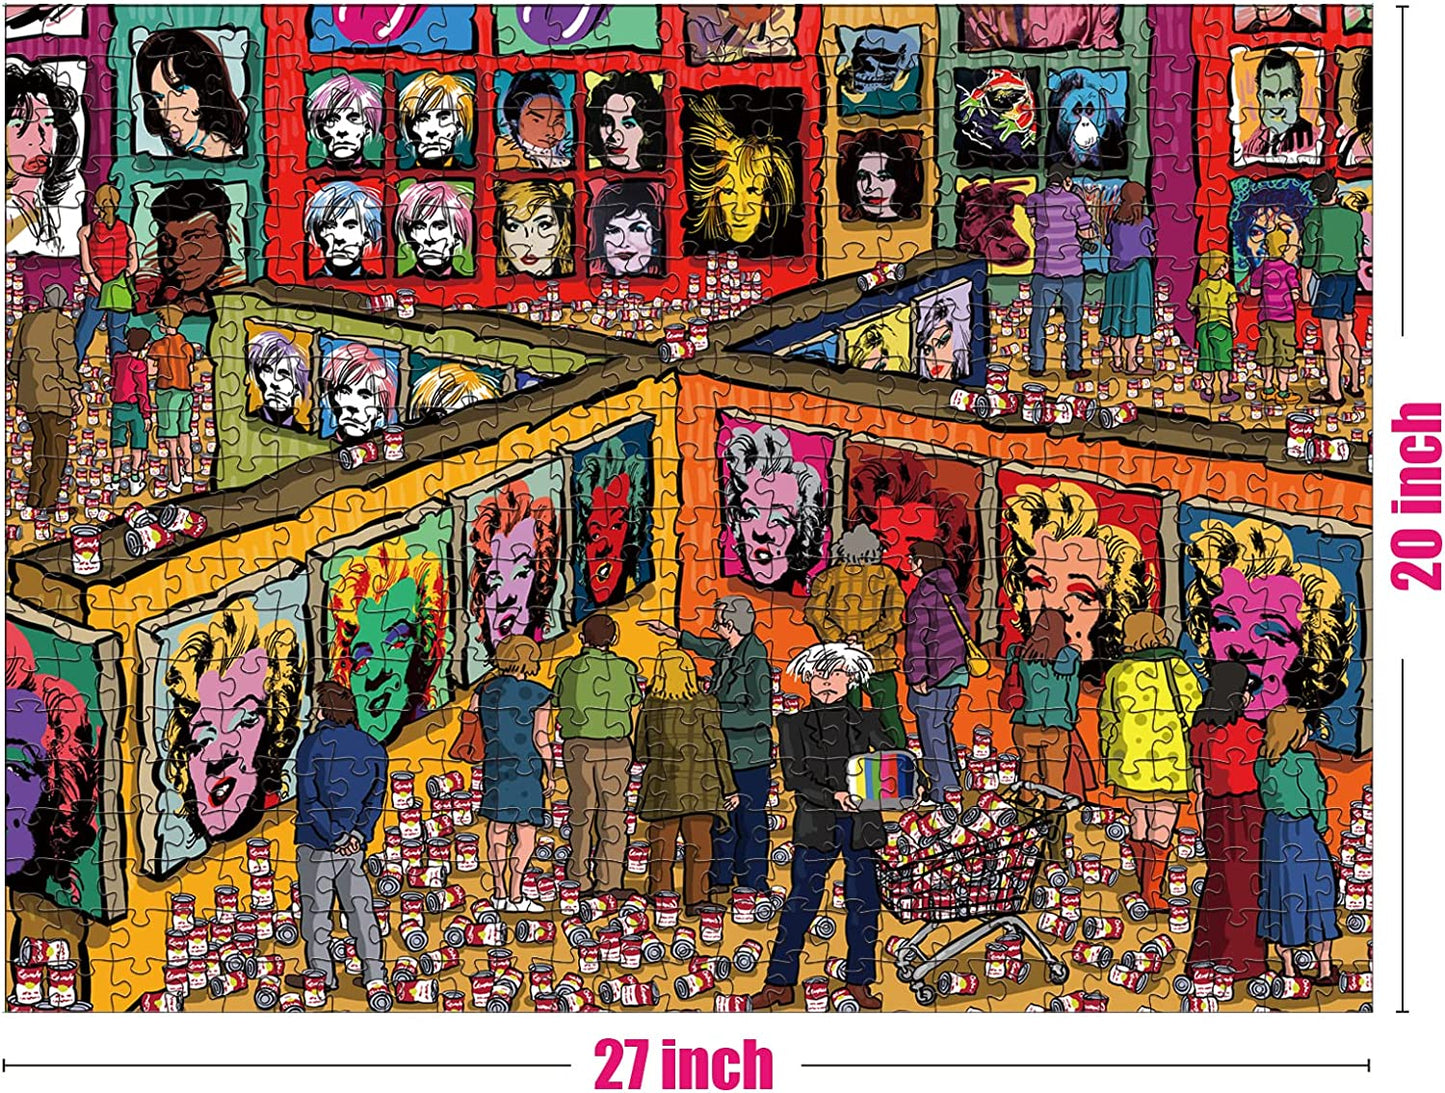 The Factory of Andy Warhol 5000 Large Piece Jigsaw Puzzle